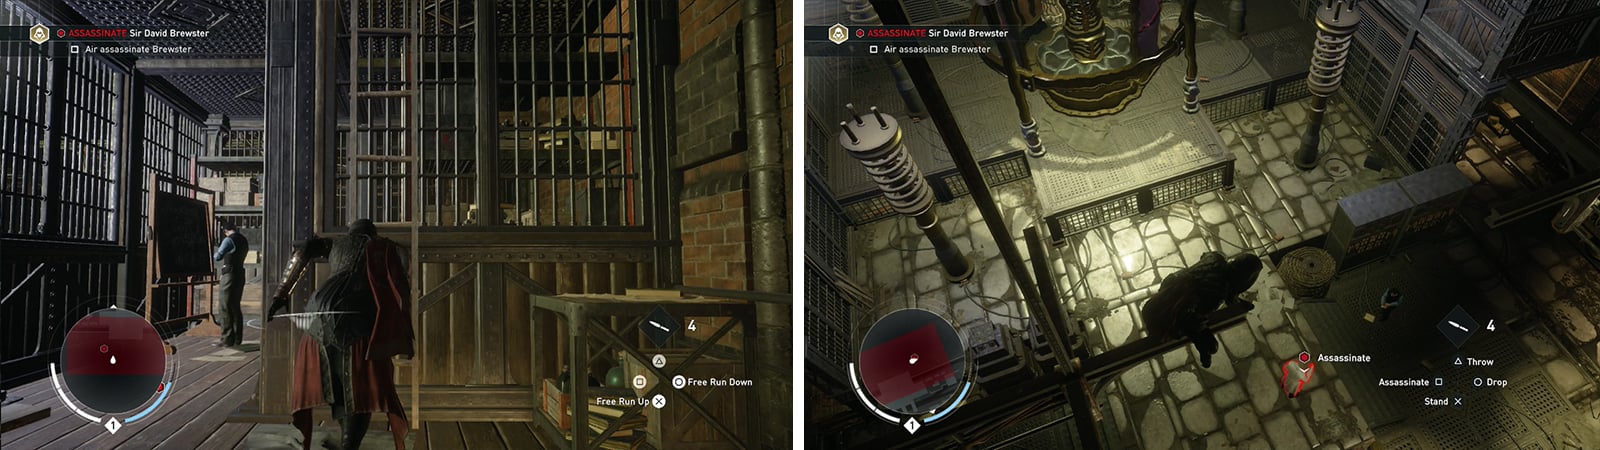 Climb to the top of the room (left) and air assassinate the target from one of the girders (right).